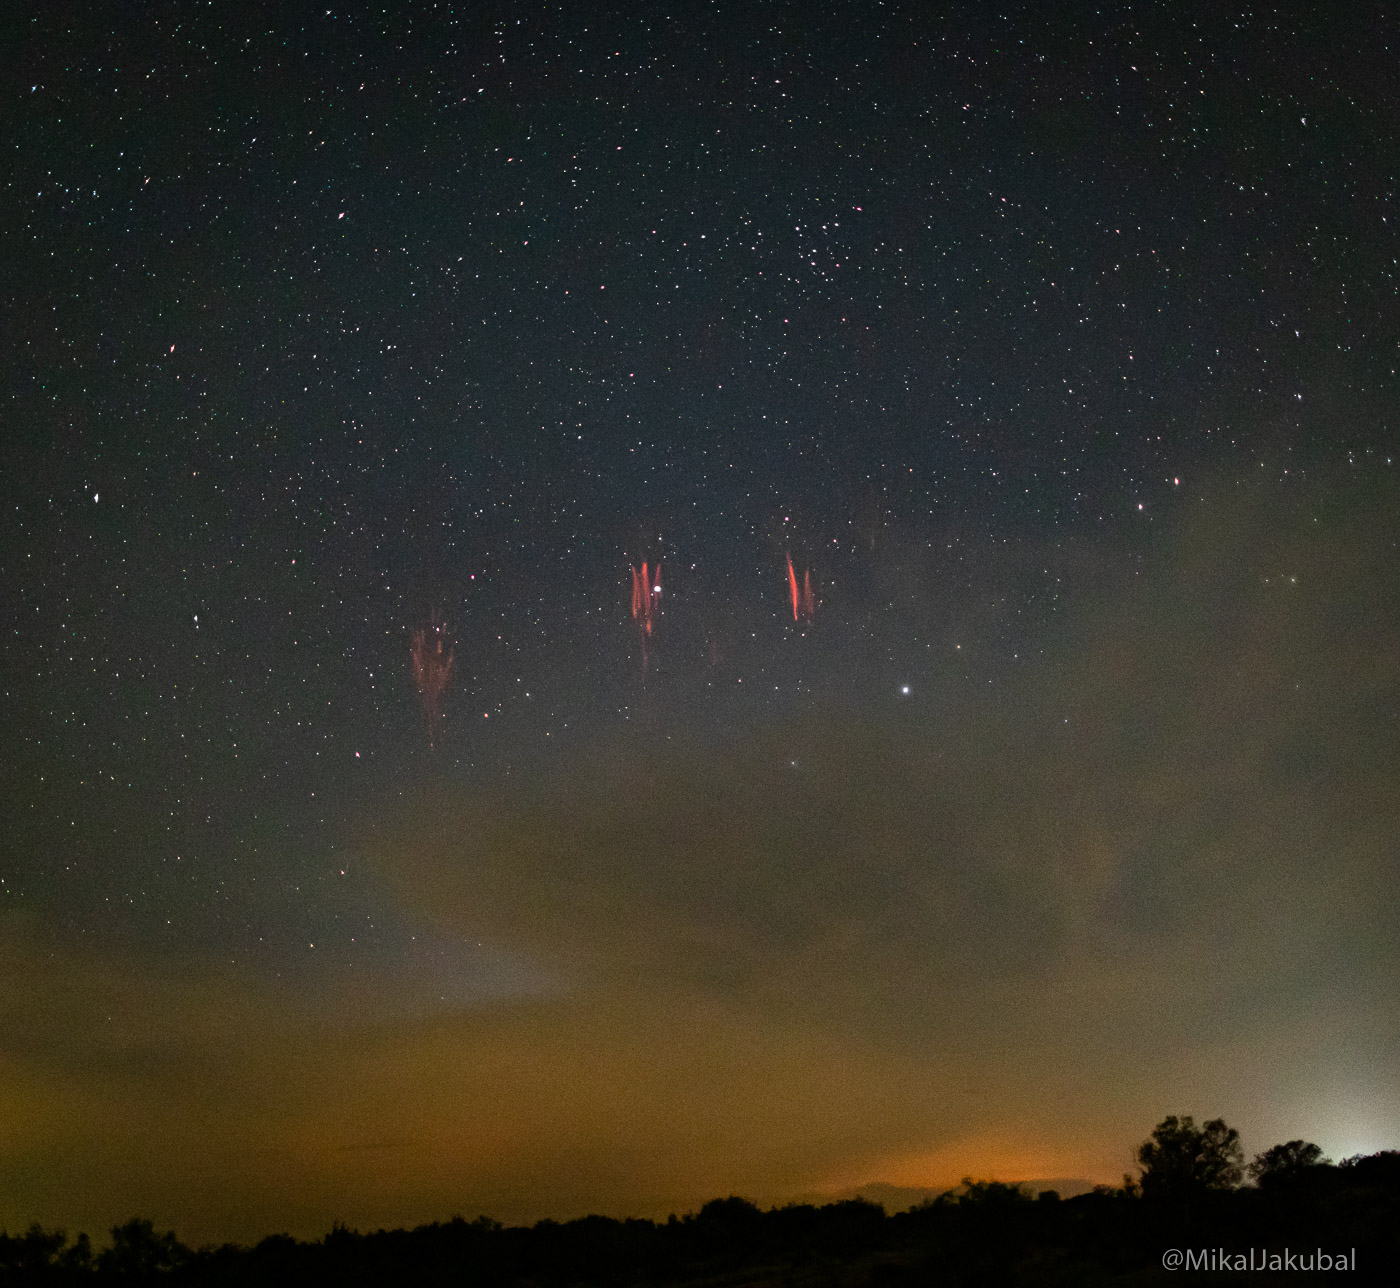 Sprites or sprite lightning. Several red bursts, like small fireworks, appear in the night sky.